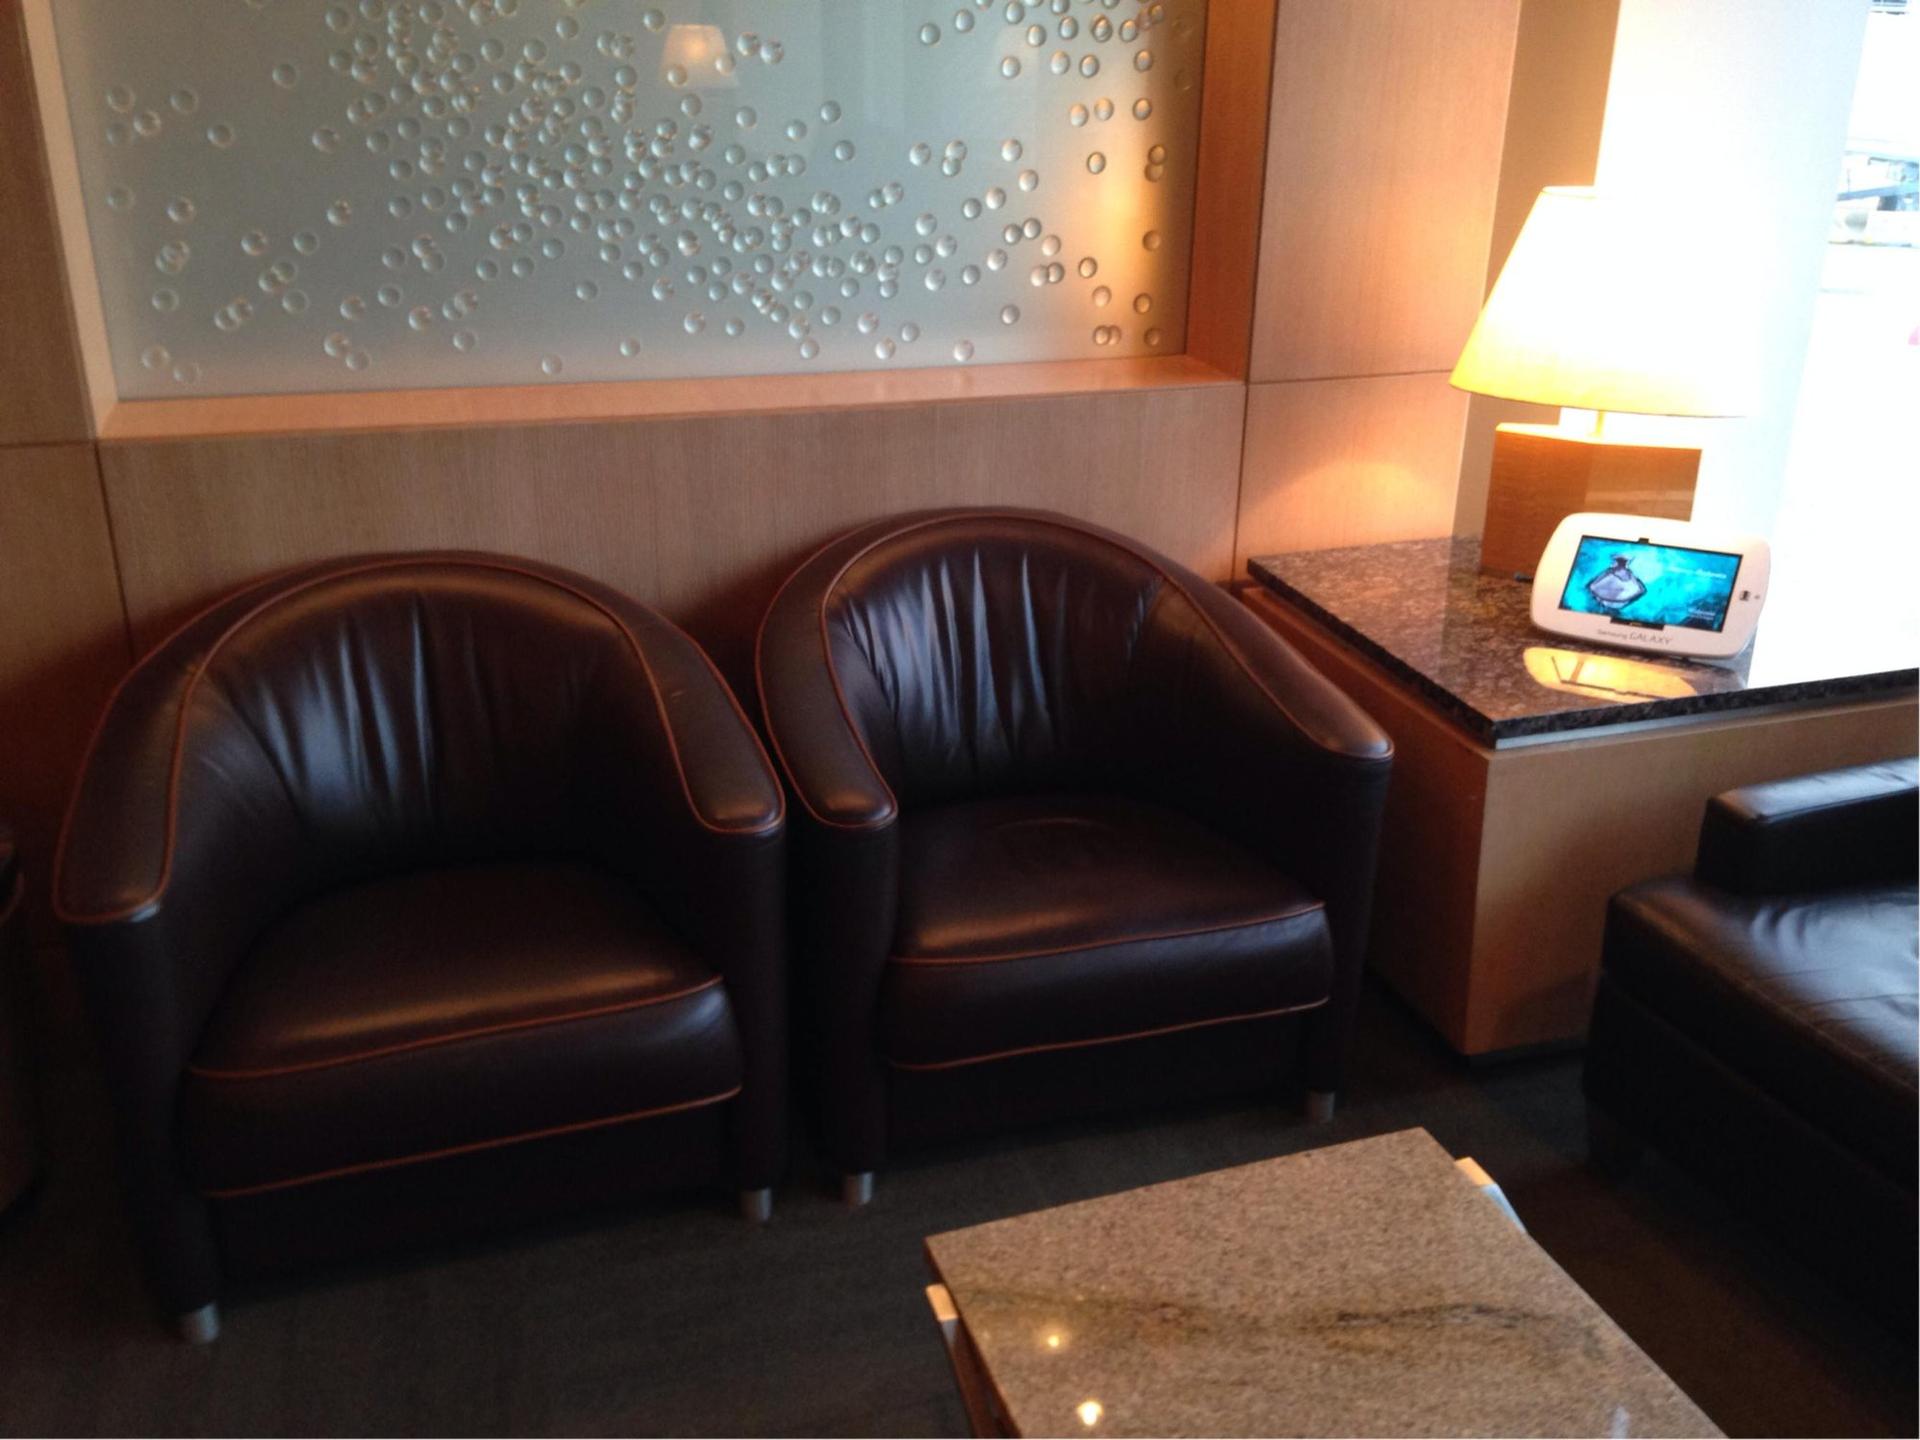 American Airlines Admirals Club image 1 of 2